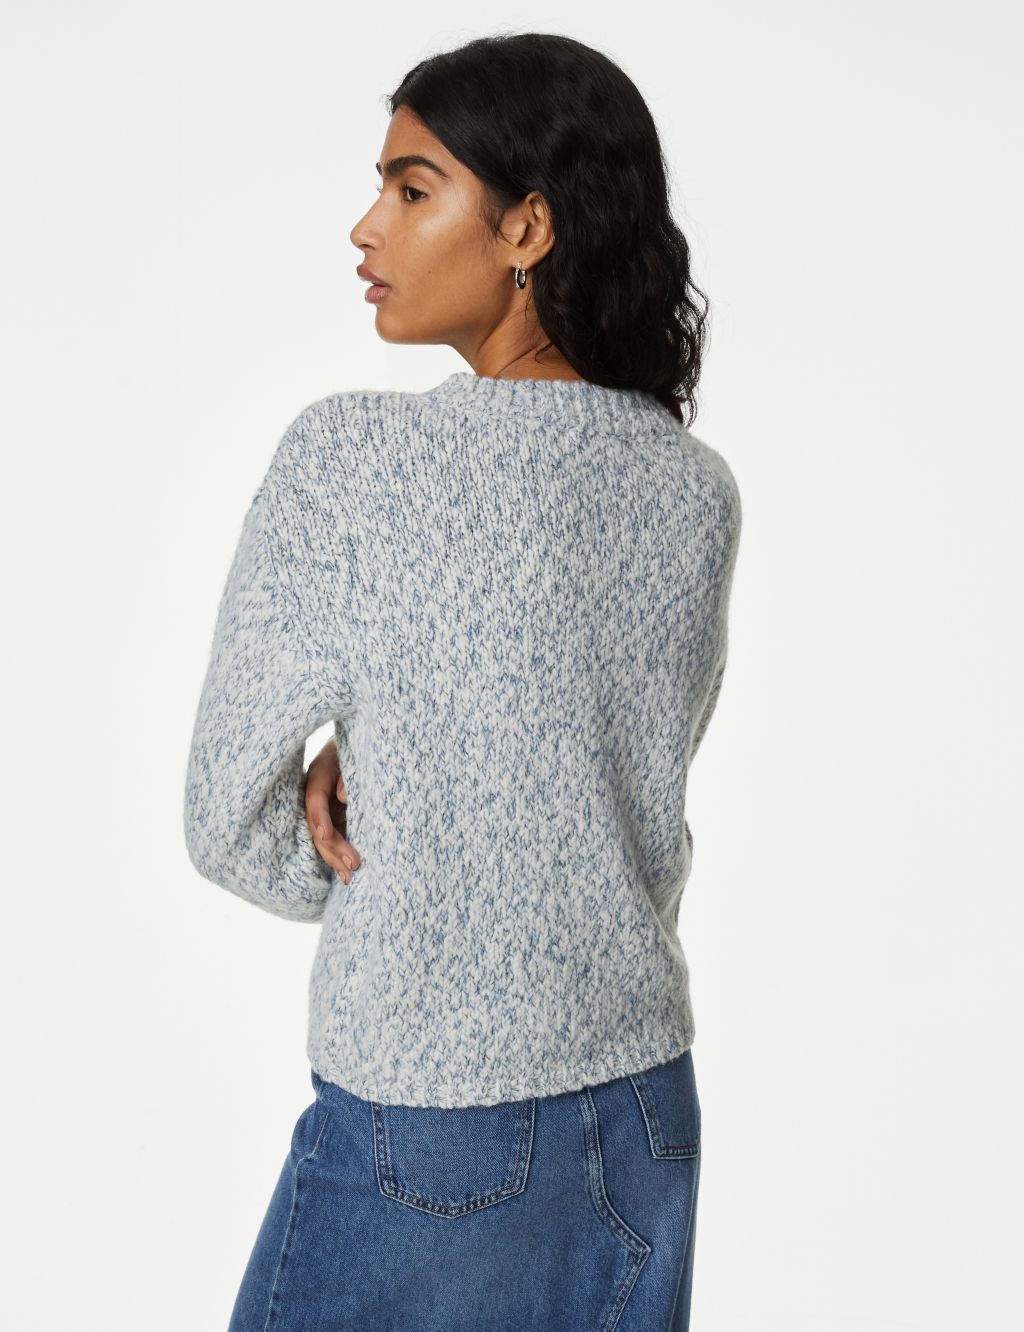 Textured V-Neck Jumper with Wool image 5